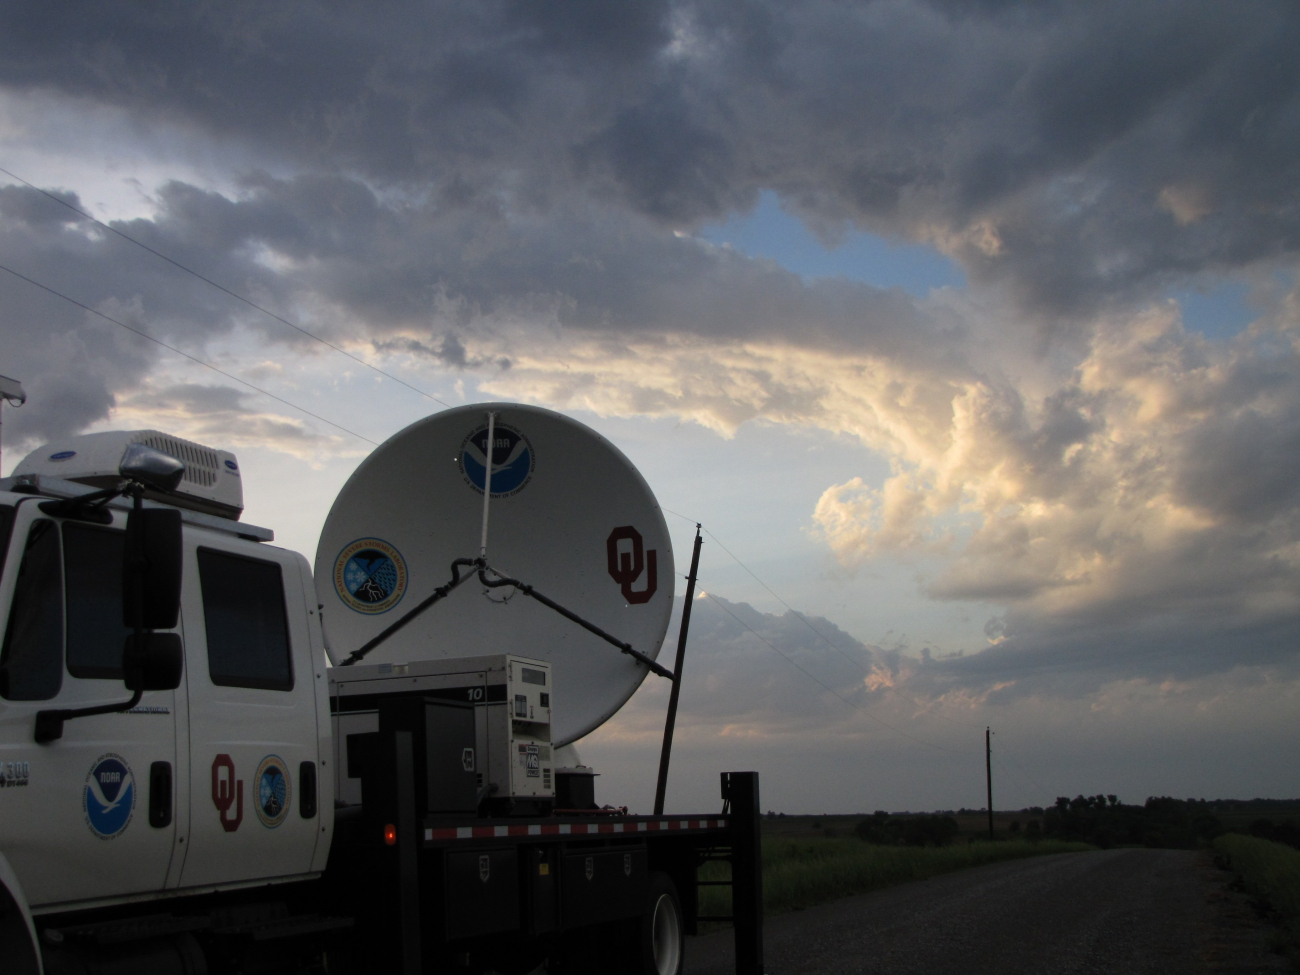 NOAA/NSSL X-Pol Mobile radar after the storm has passed over